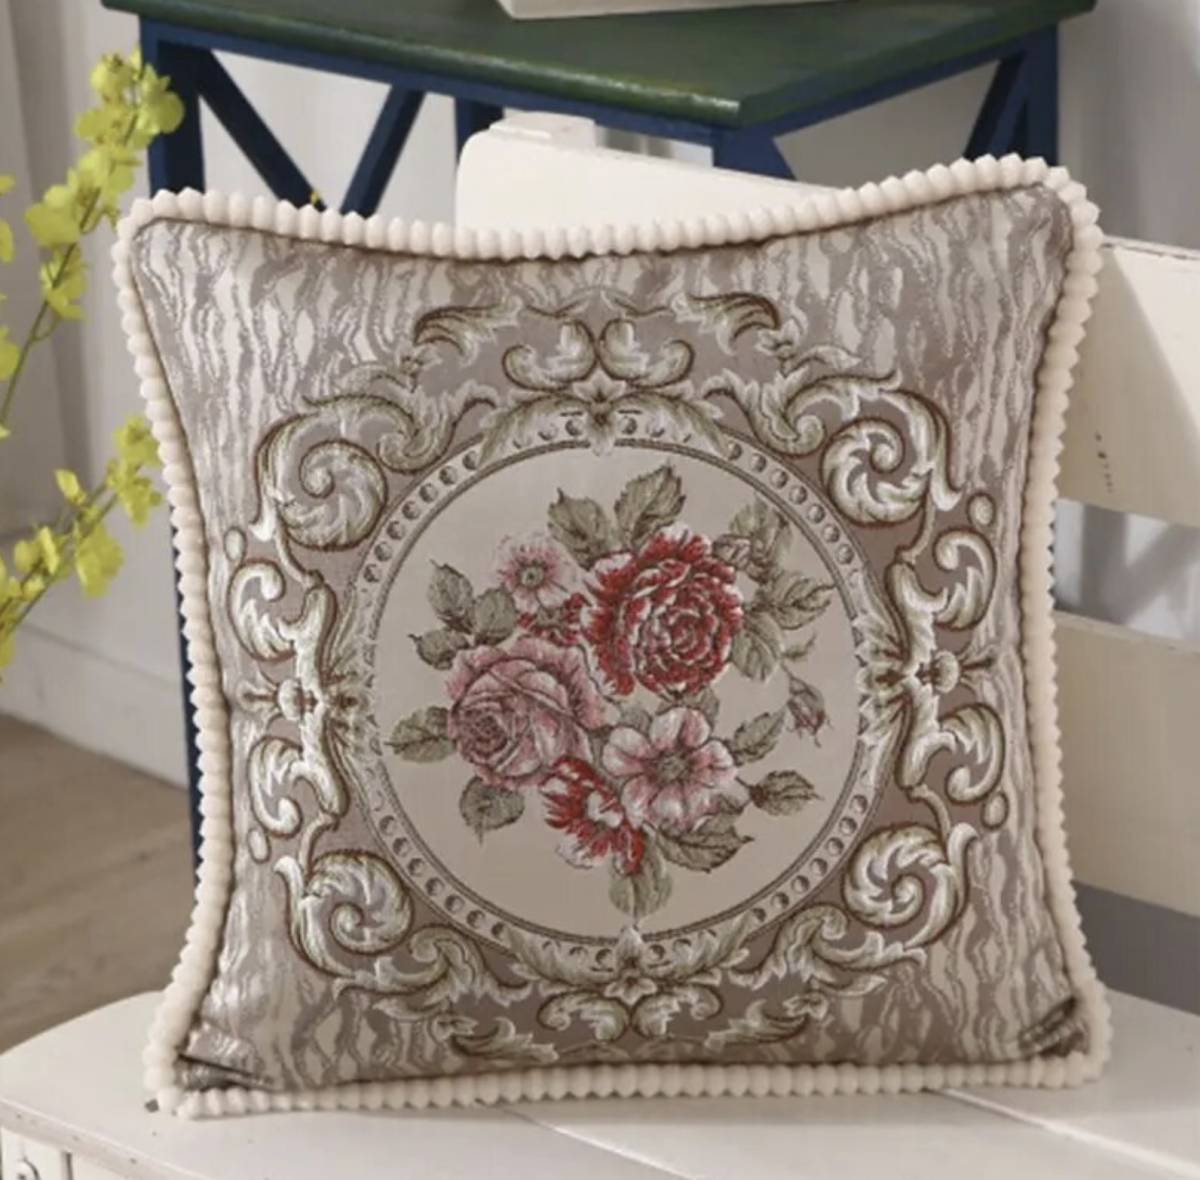 Free shipping★New item Buy now★Luxury★Vintage European jacquard fabric★Needle work★Embroidery cushion cover★Beige, handmade works, interior, miscellaneous goods, cushion